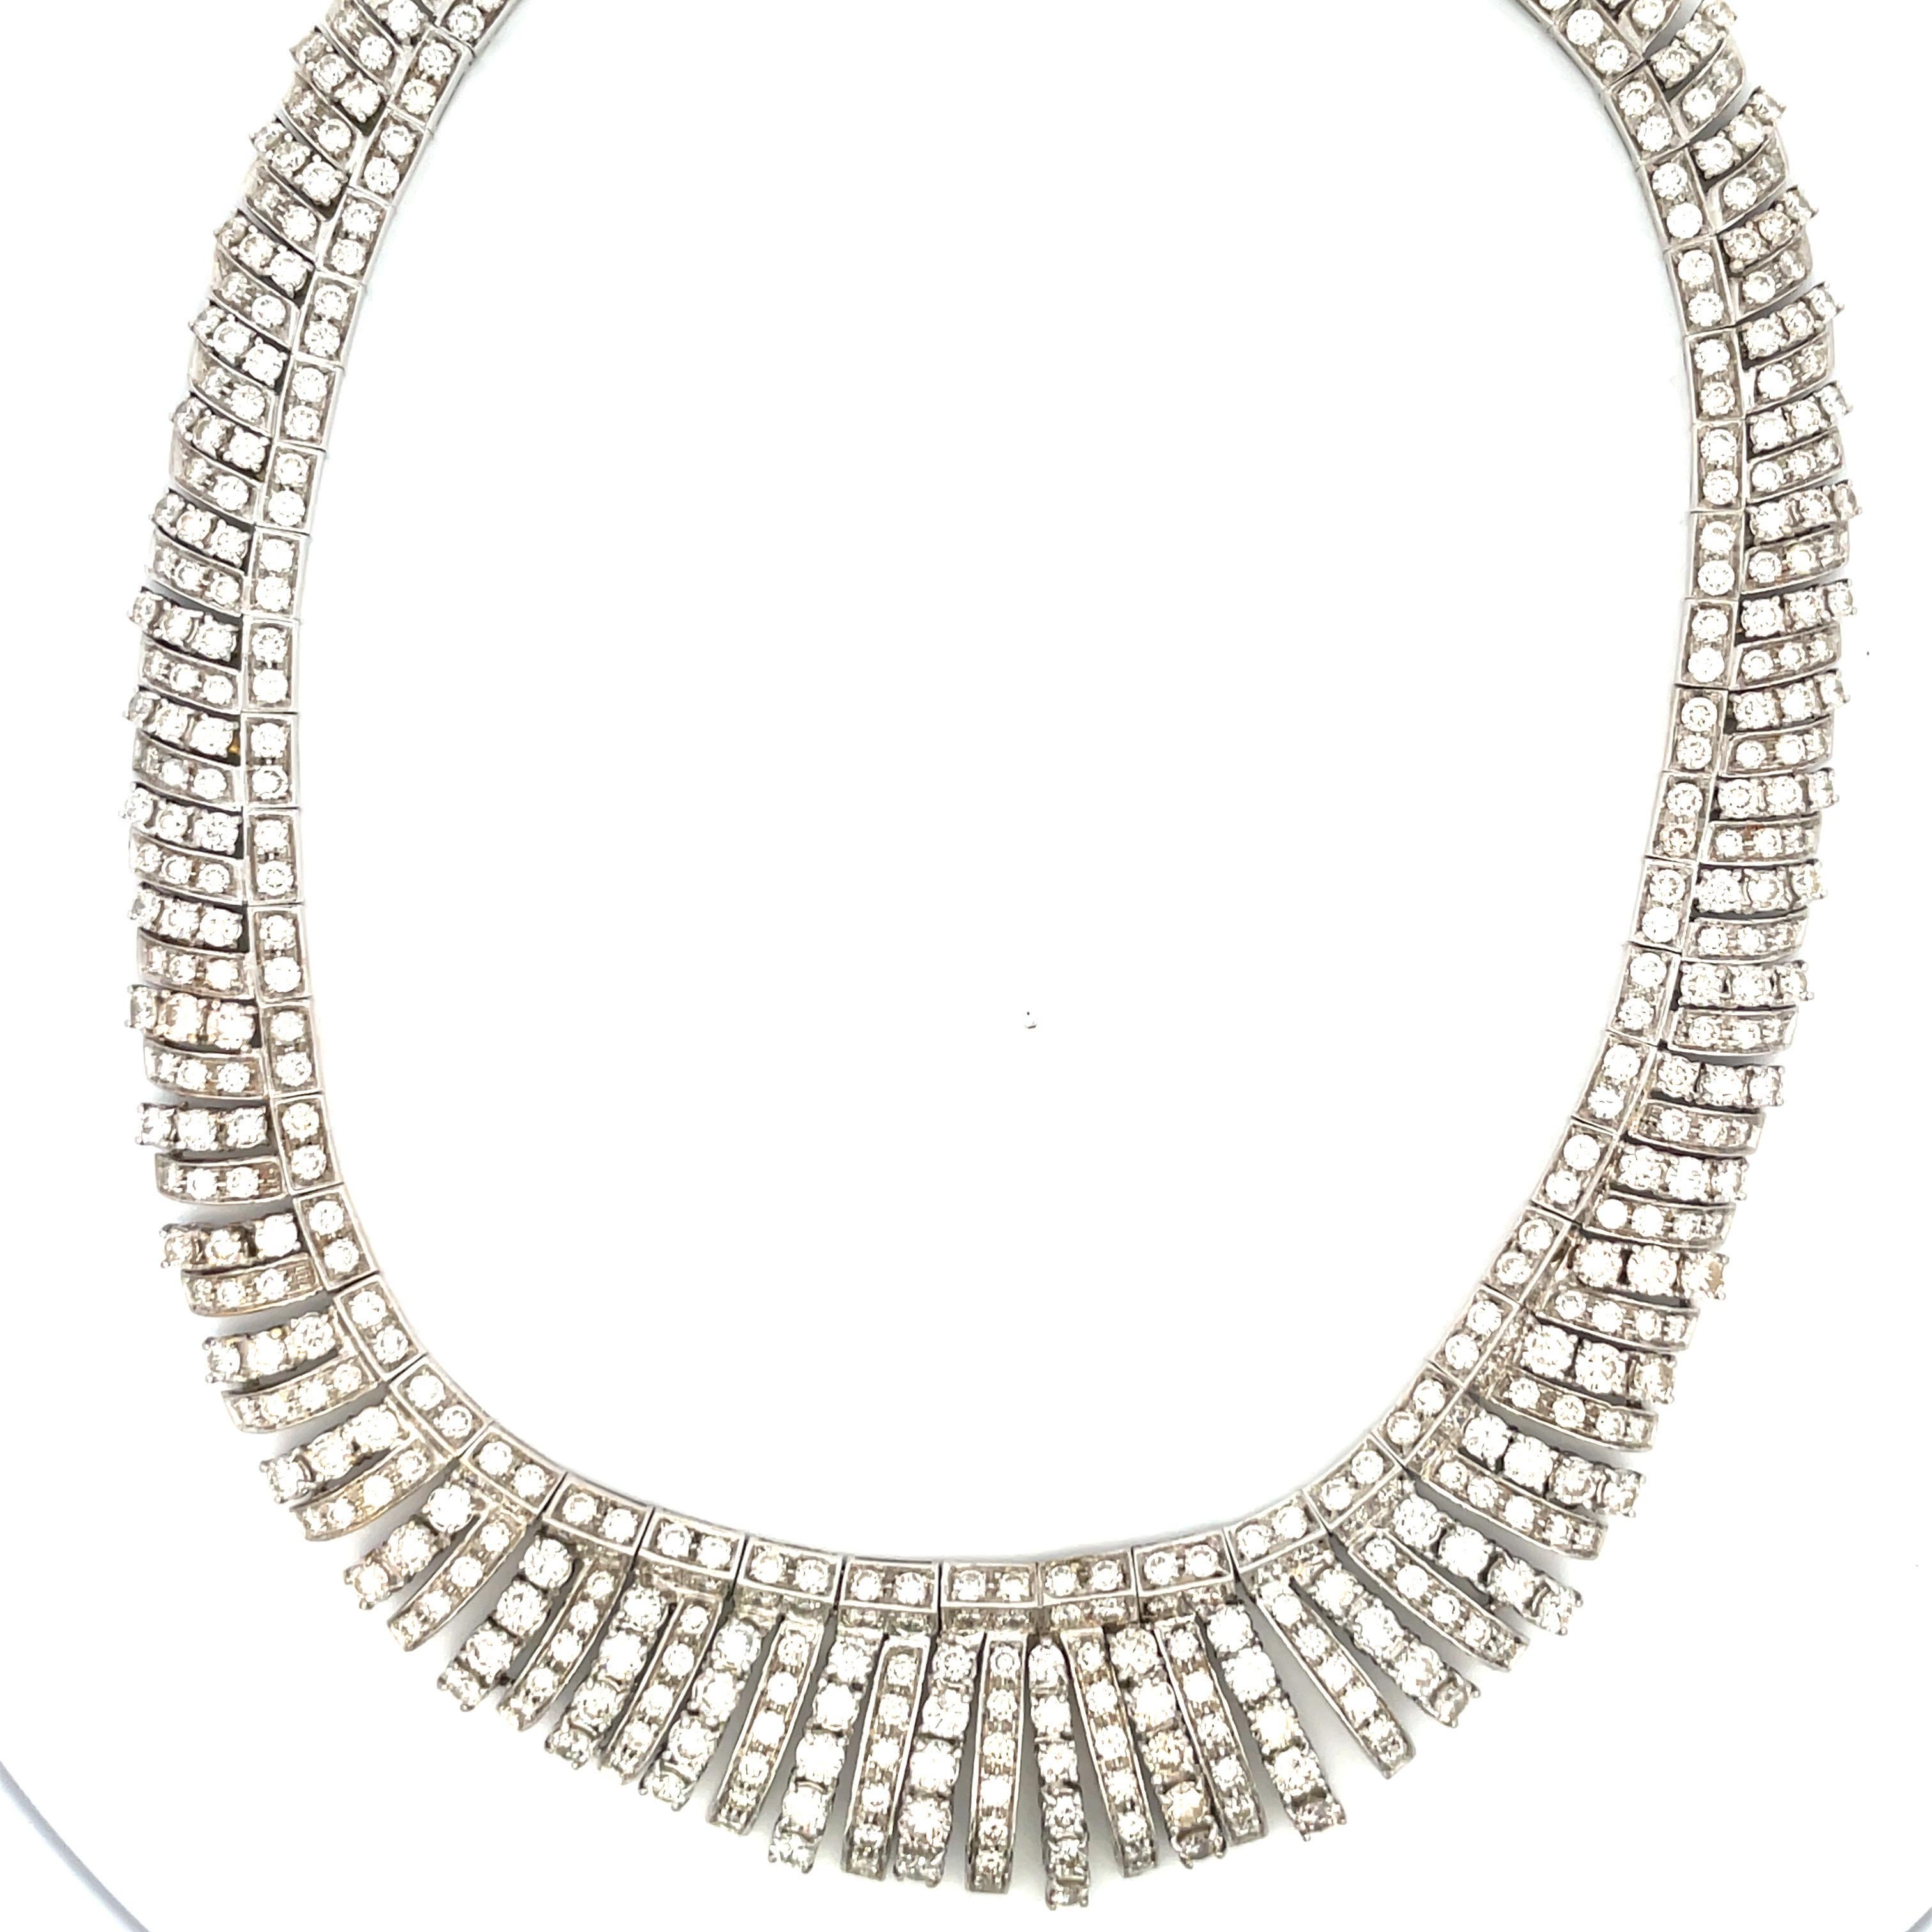 Vintage Diamond Collar Bib Necklace 66 Carats 18 Karat White Gold 113.5 Grams In Excellent Condition For Sale In New York, NY